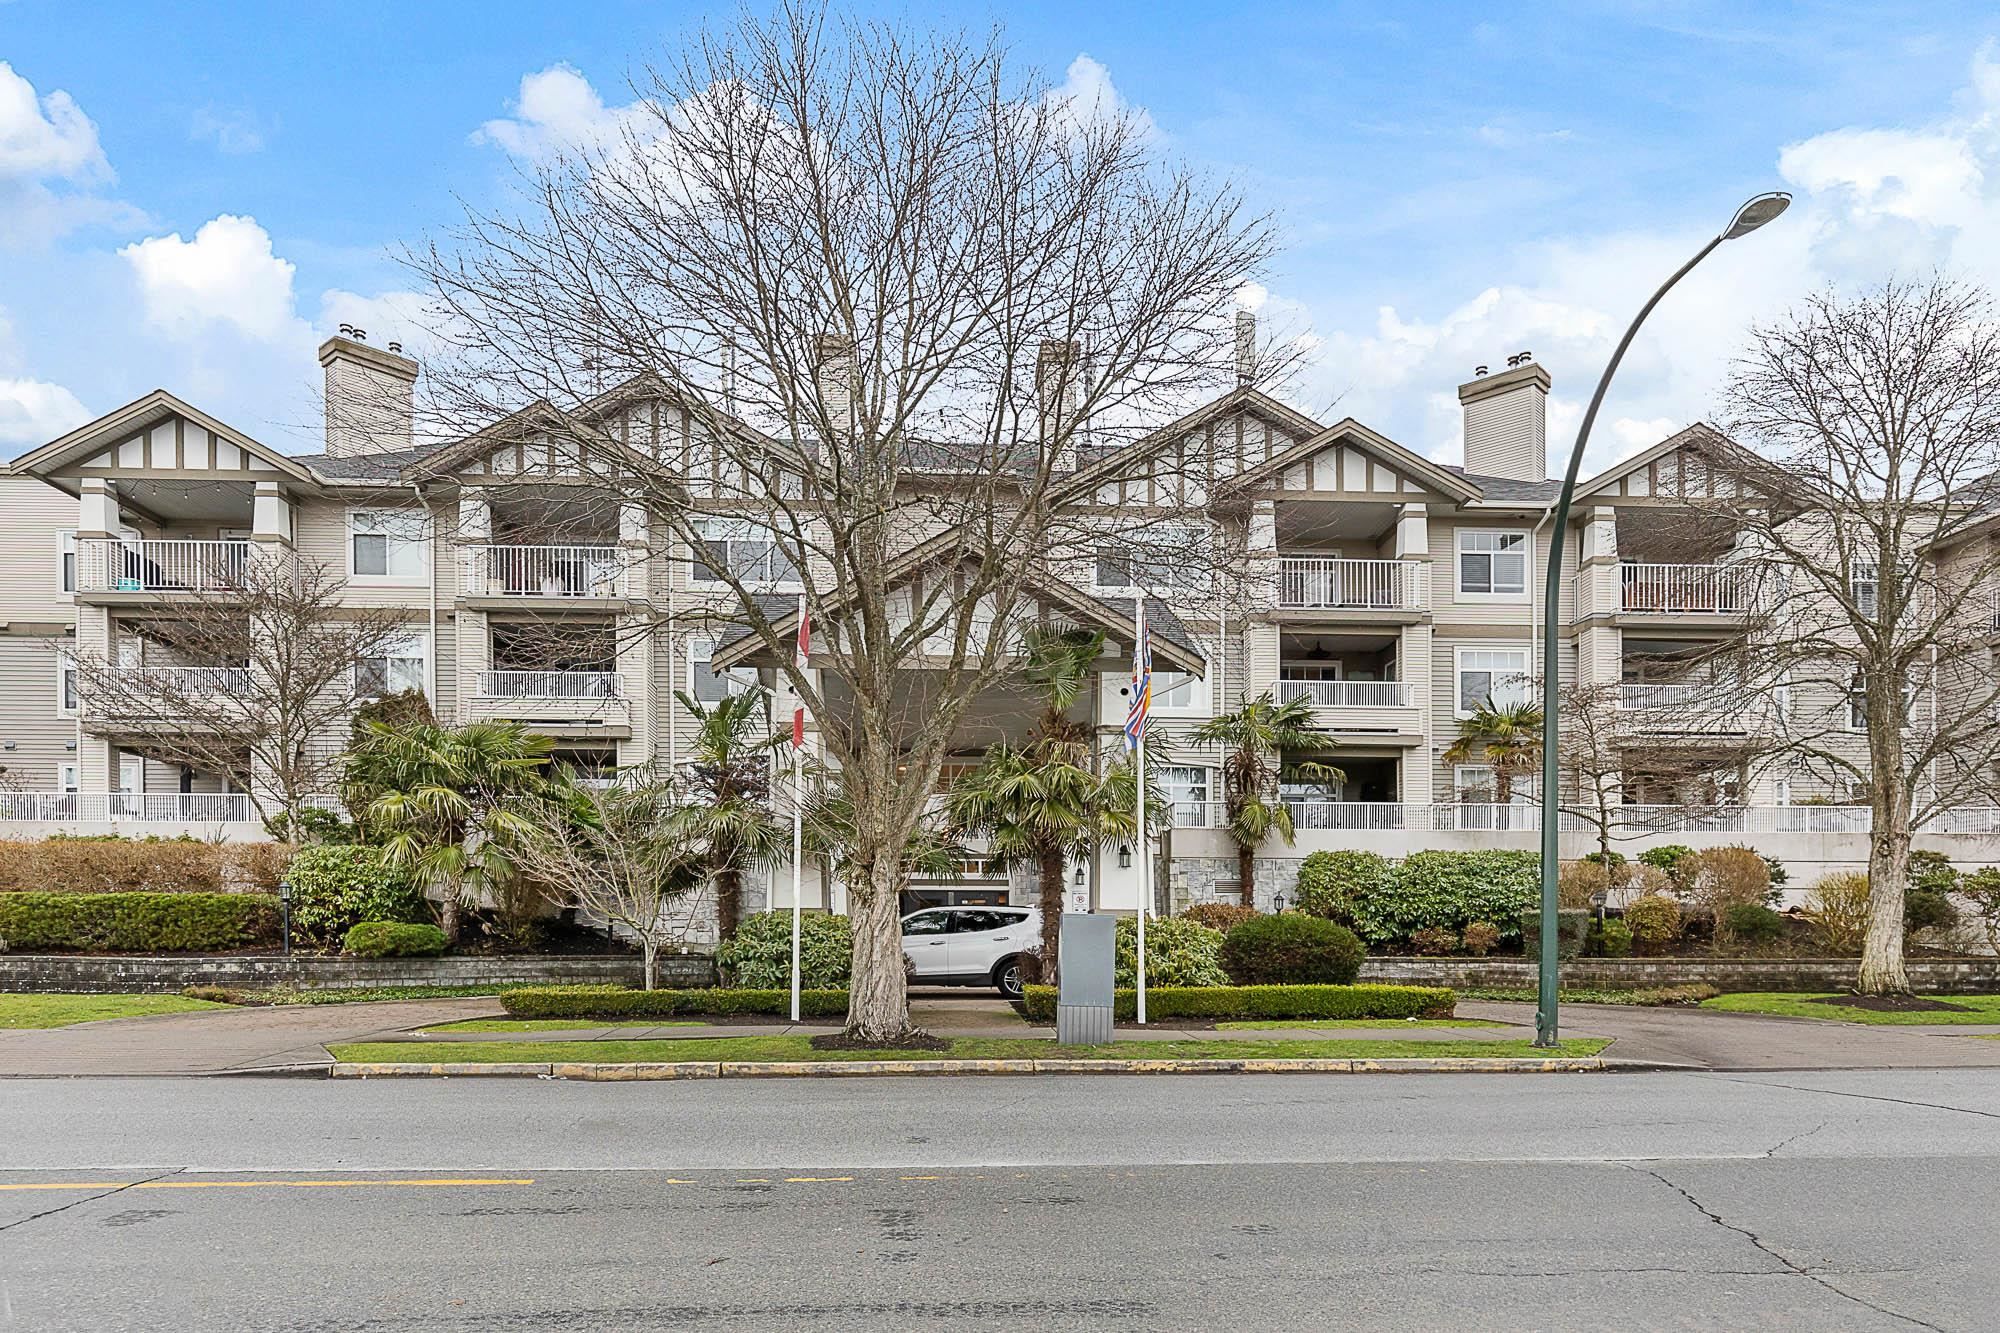 New property listed in Delta Manor, Ladner